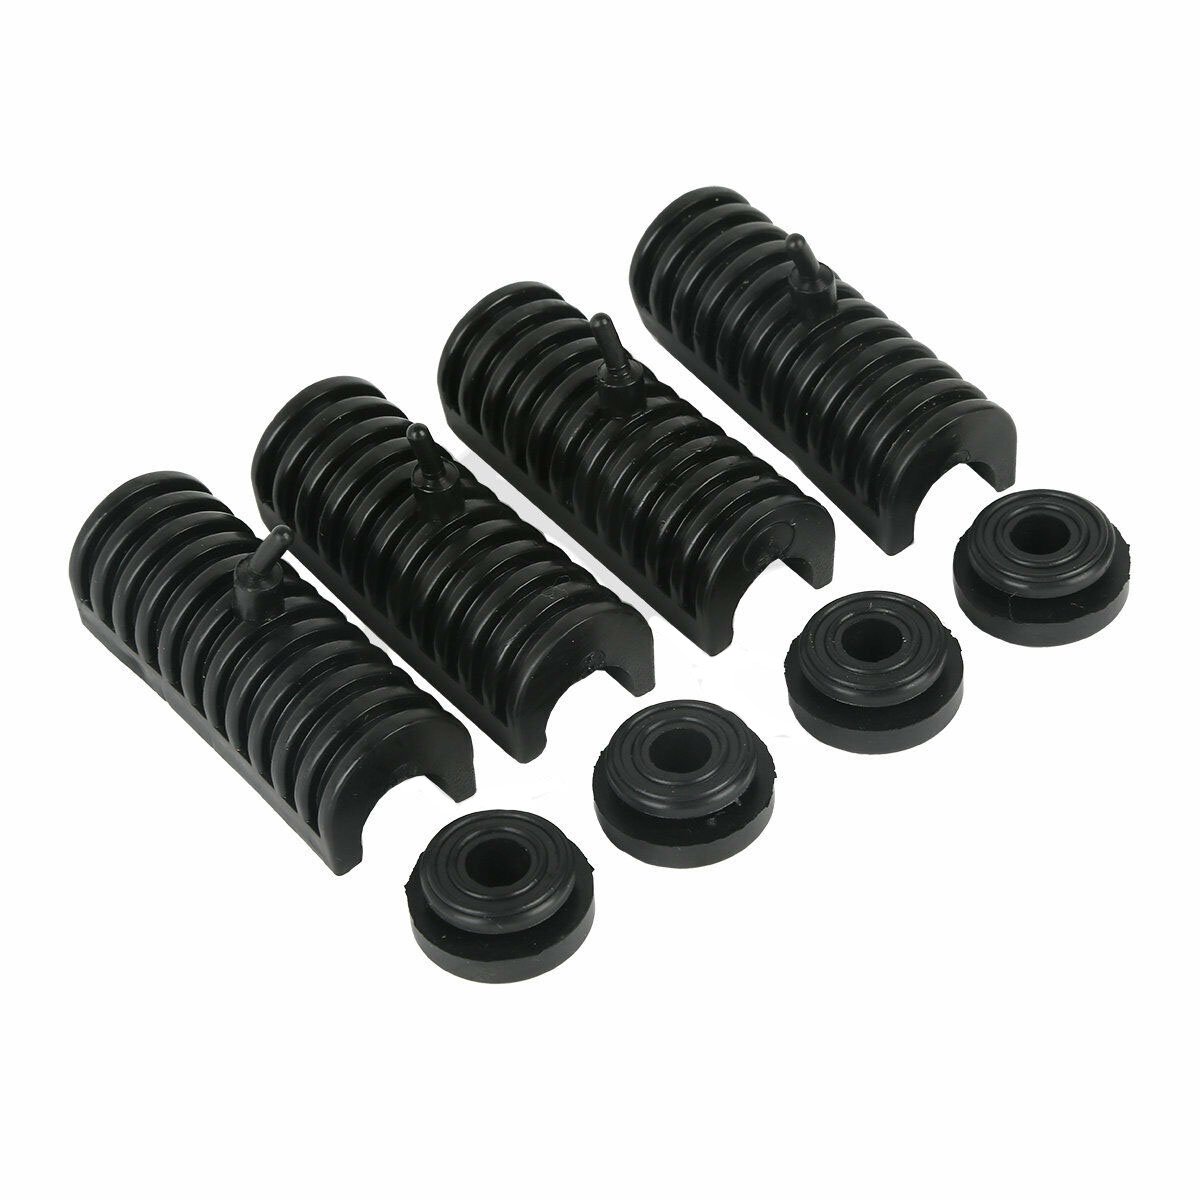 Rubber Grommets Cushions Hard Saddlebag Support Fit For Harley Touring 1994-2013